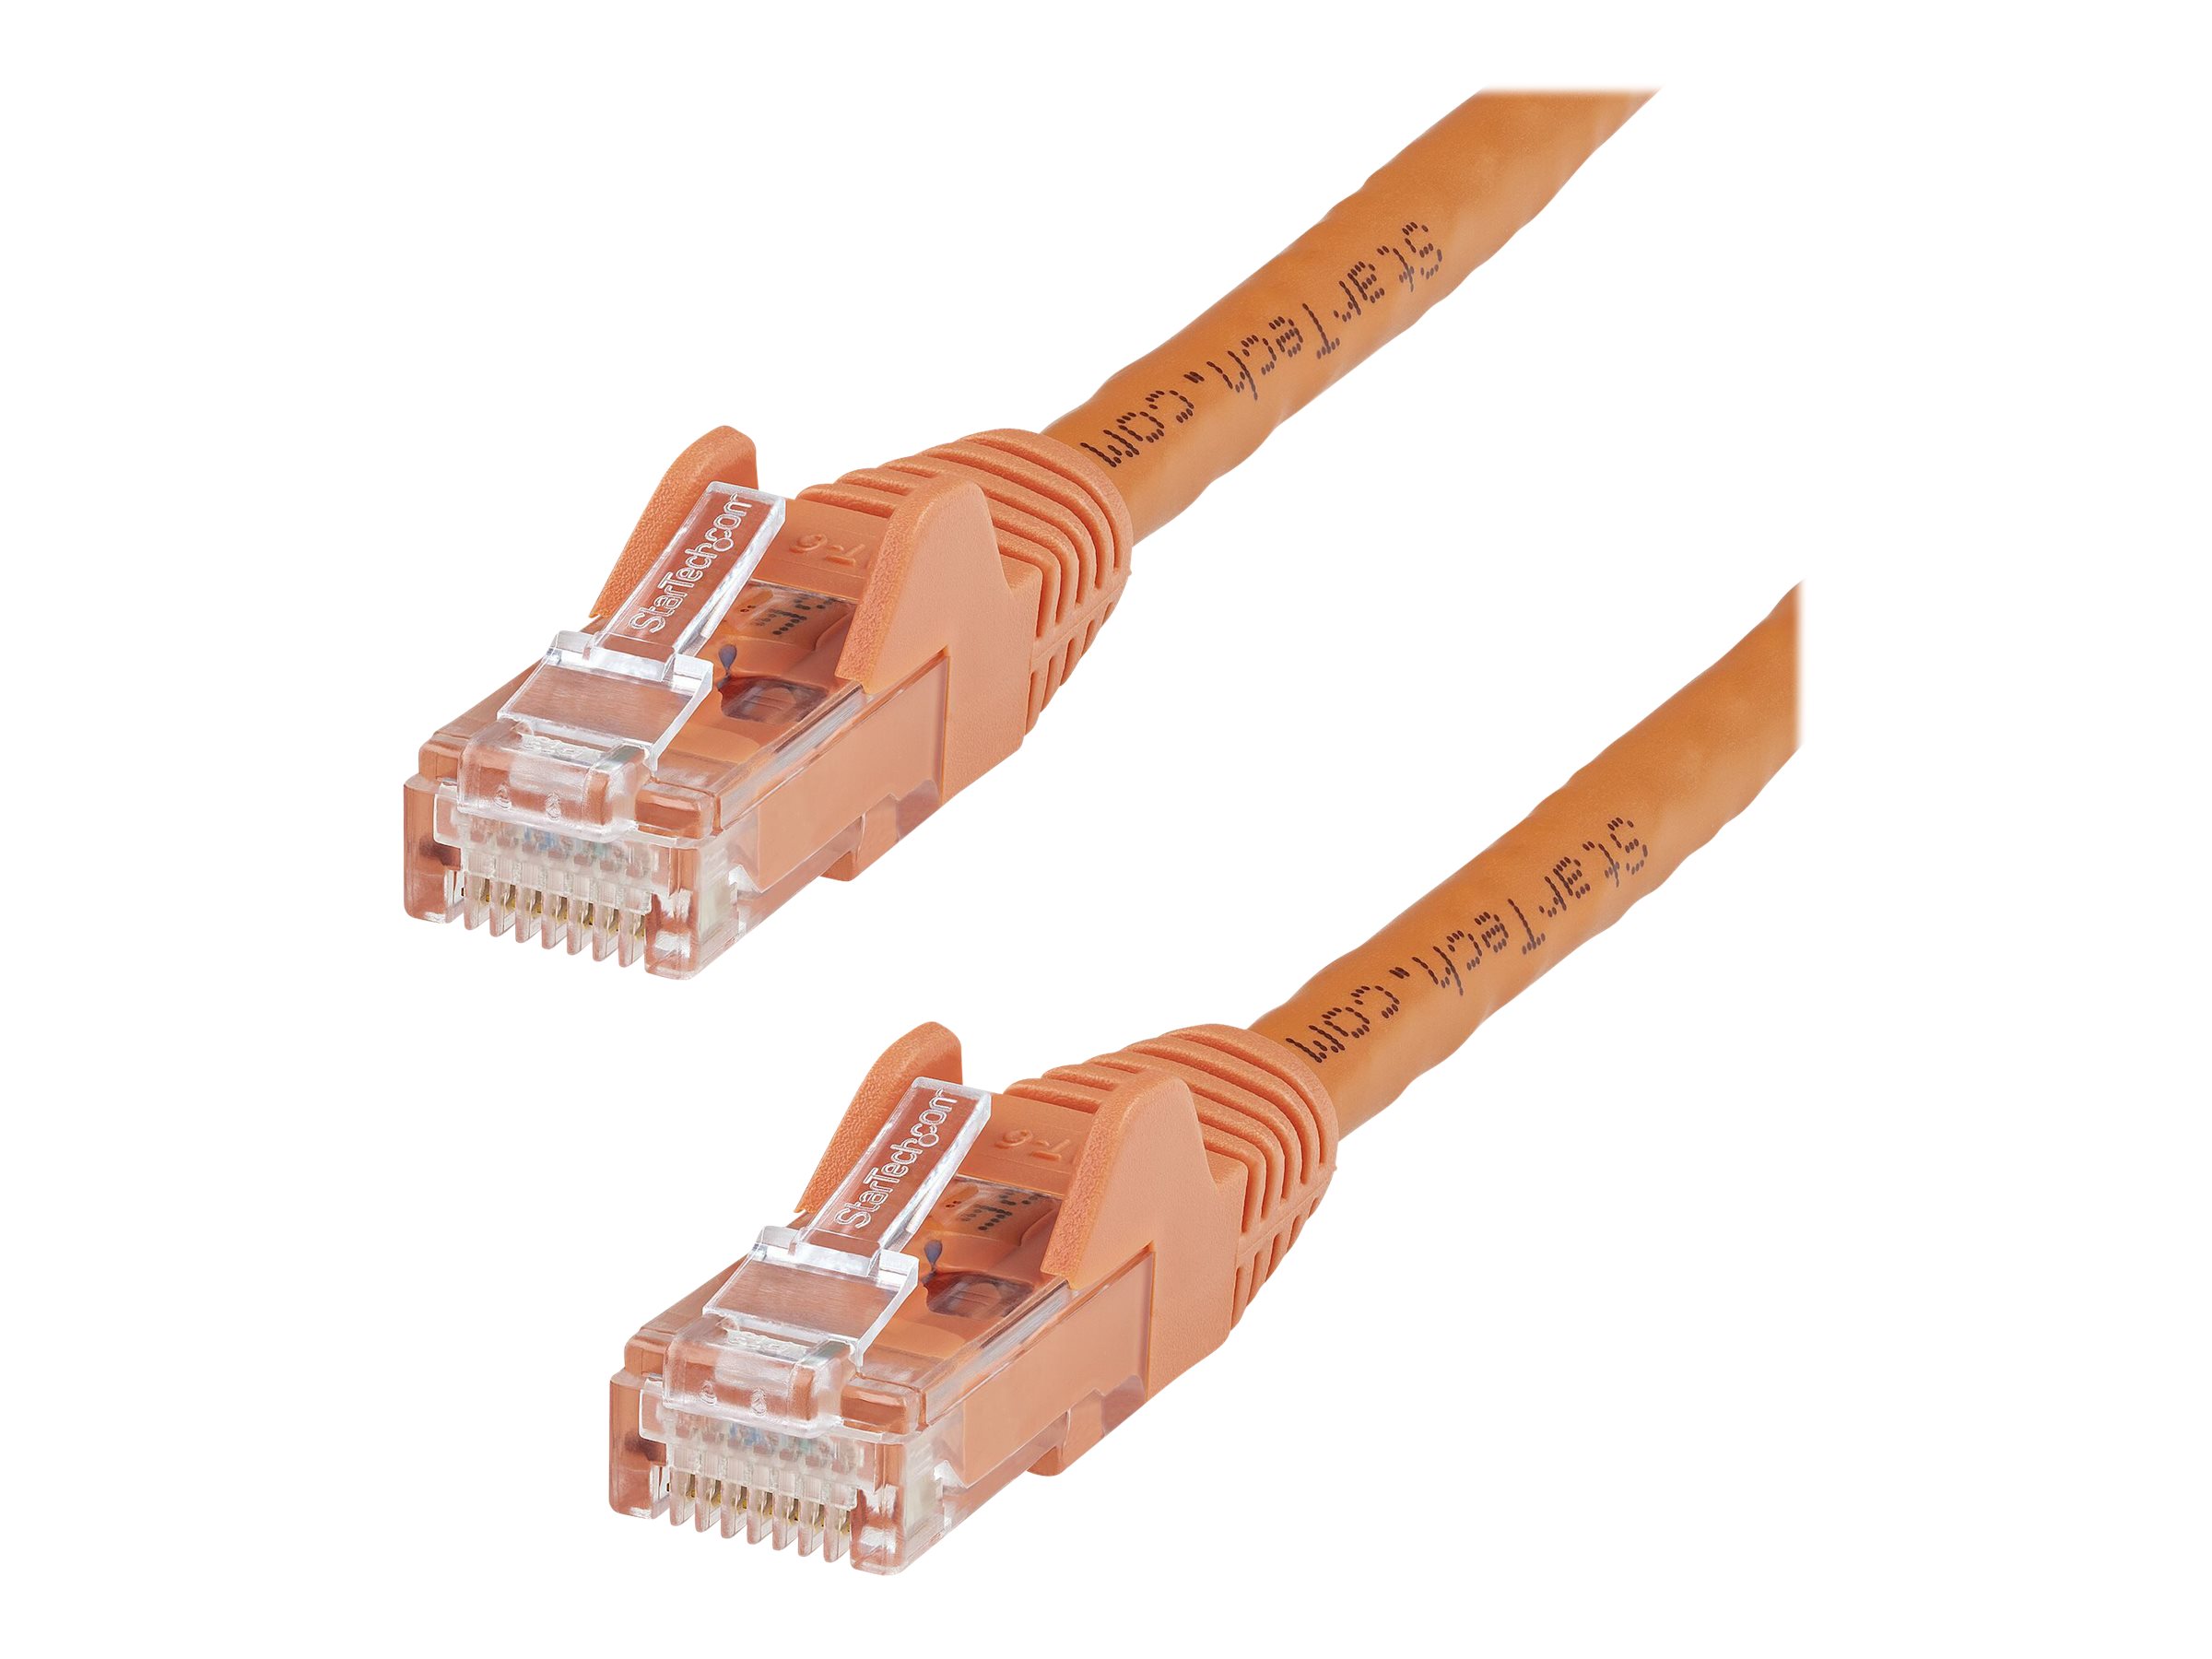 StarTech.com 25ft CAT6 Ethernet Cable, 10 Gigabit Snagless RJ45 650MHz 100W PoE Patch Cord, CAT 6 10GbE UTP Network Cable w/Strain Relief, Orange, Fluke Tested/Wiring is UL Certified/TIA